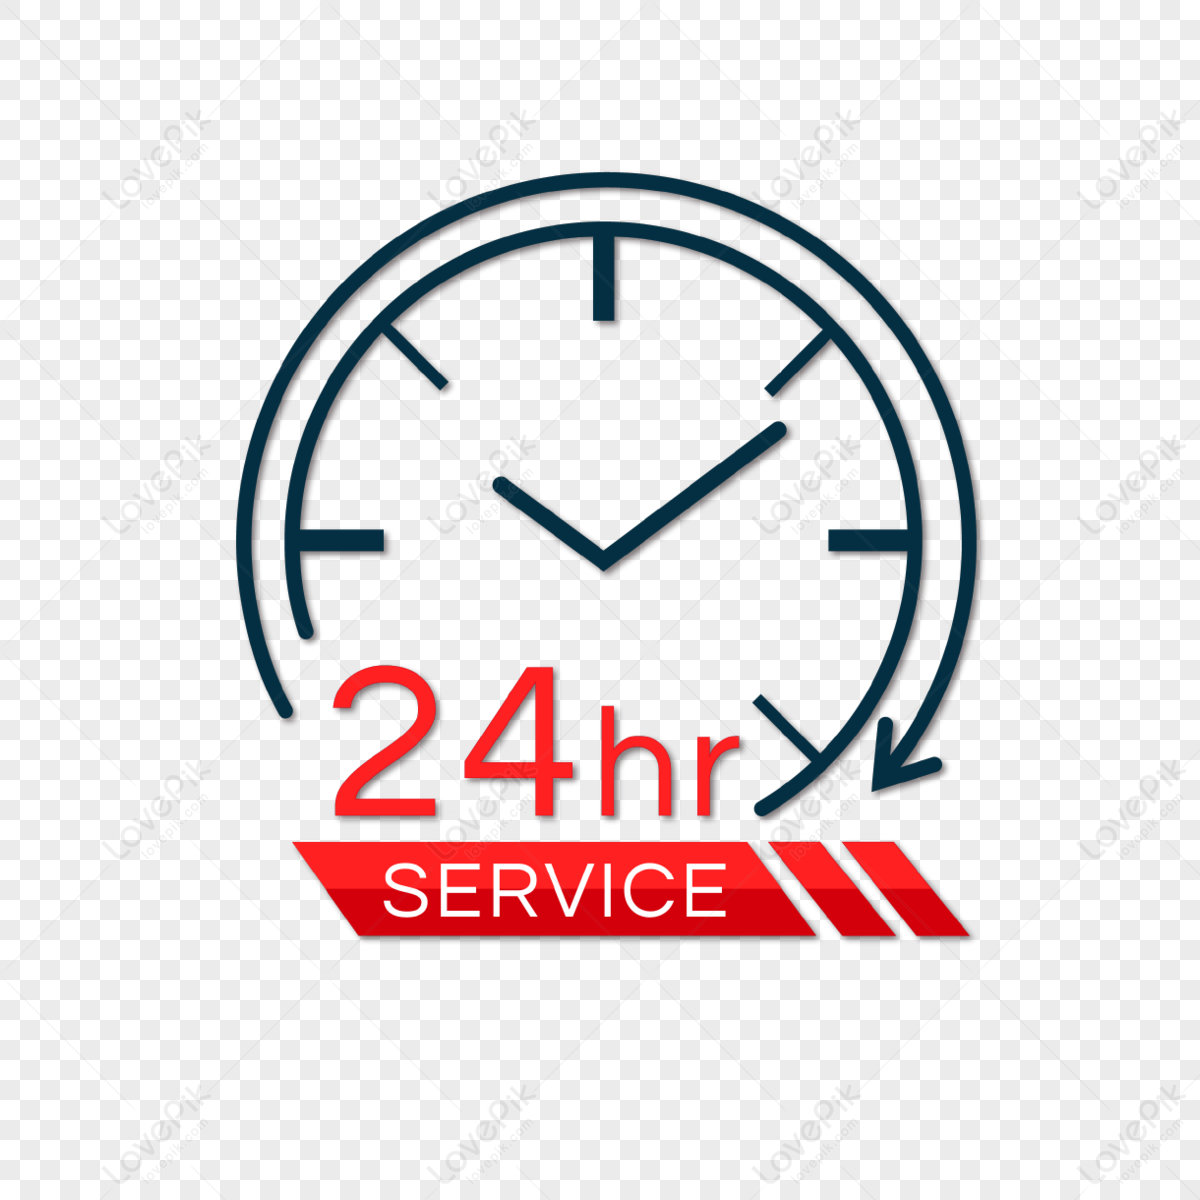 24 hour service Stock Photos, Royalty Free 24 hour service Images |  Depositphotos